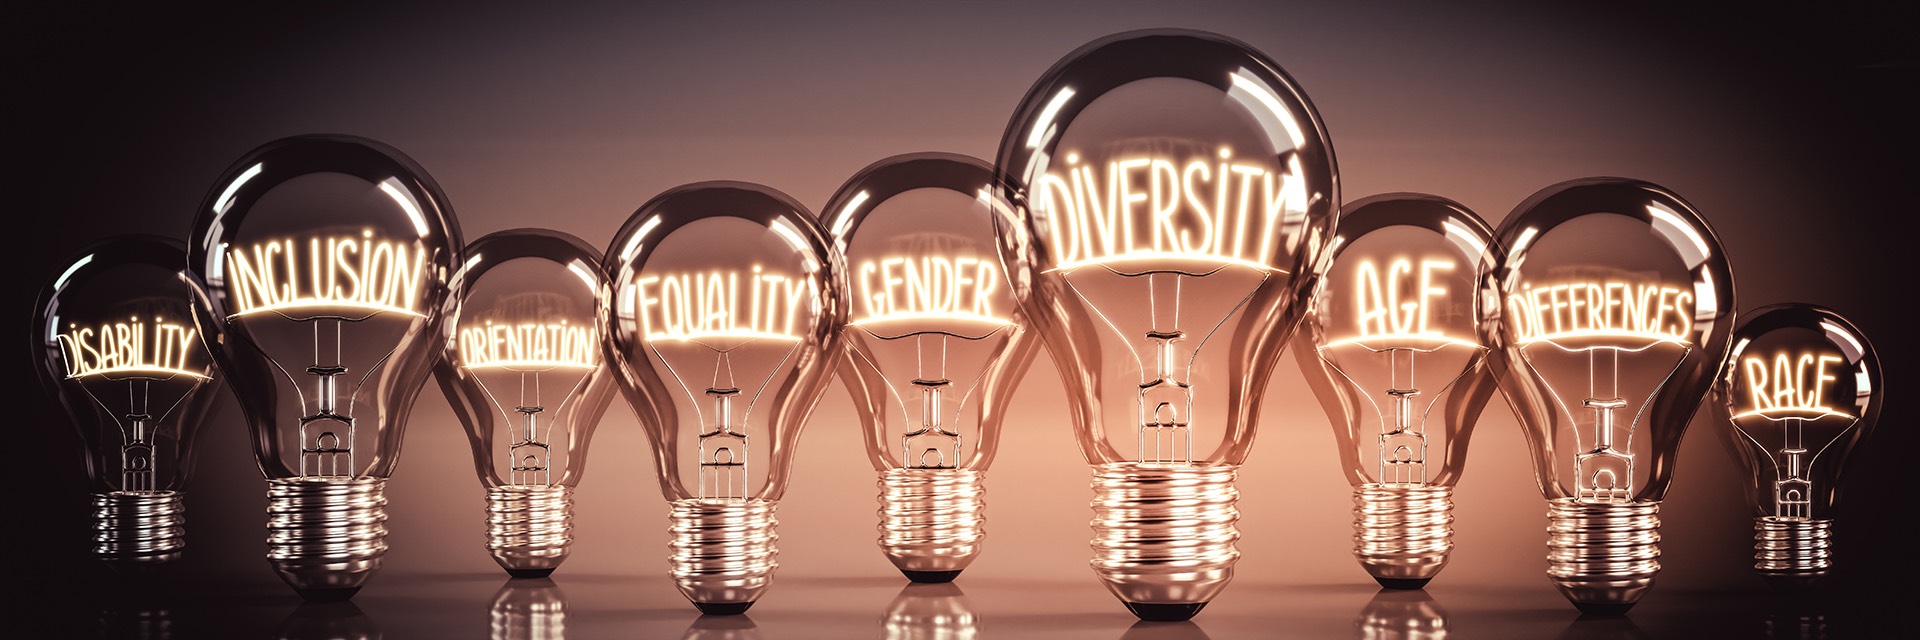 disability, inclusion, orientation, equality,diversity, age differences, race in a row of lightbulbs